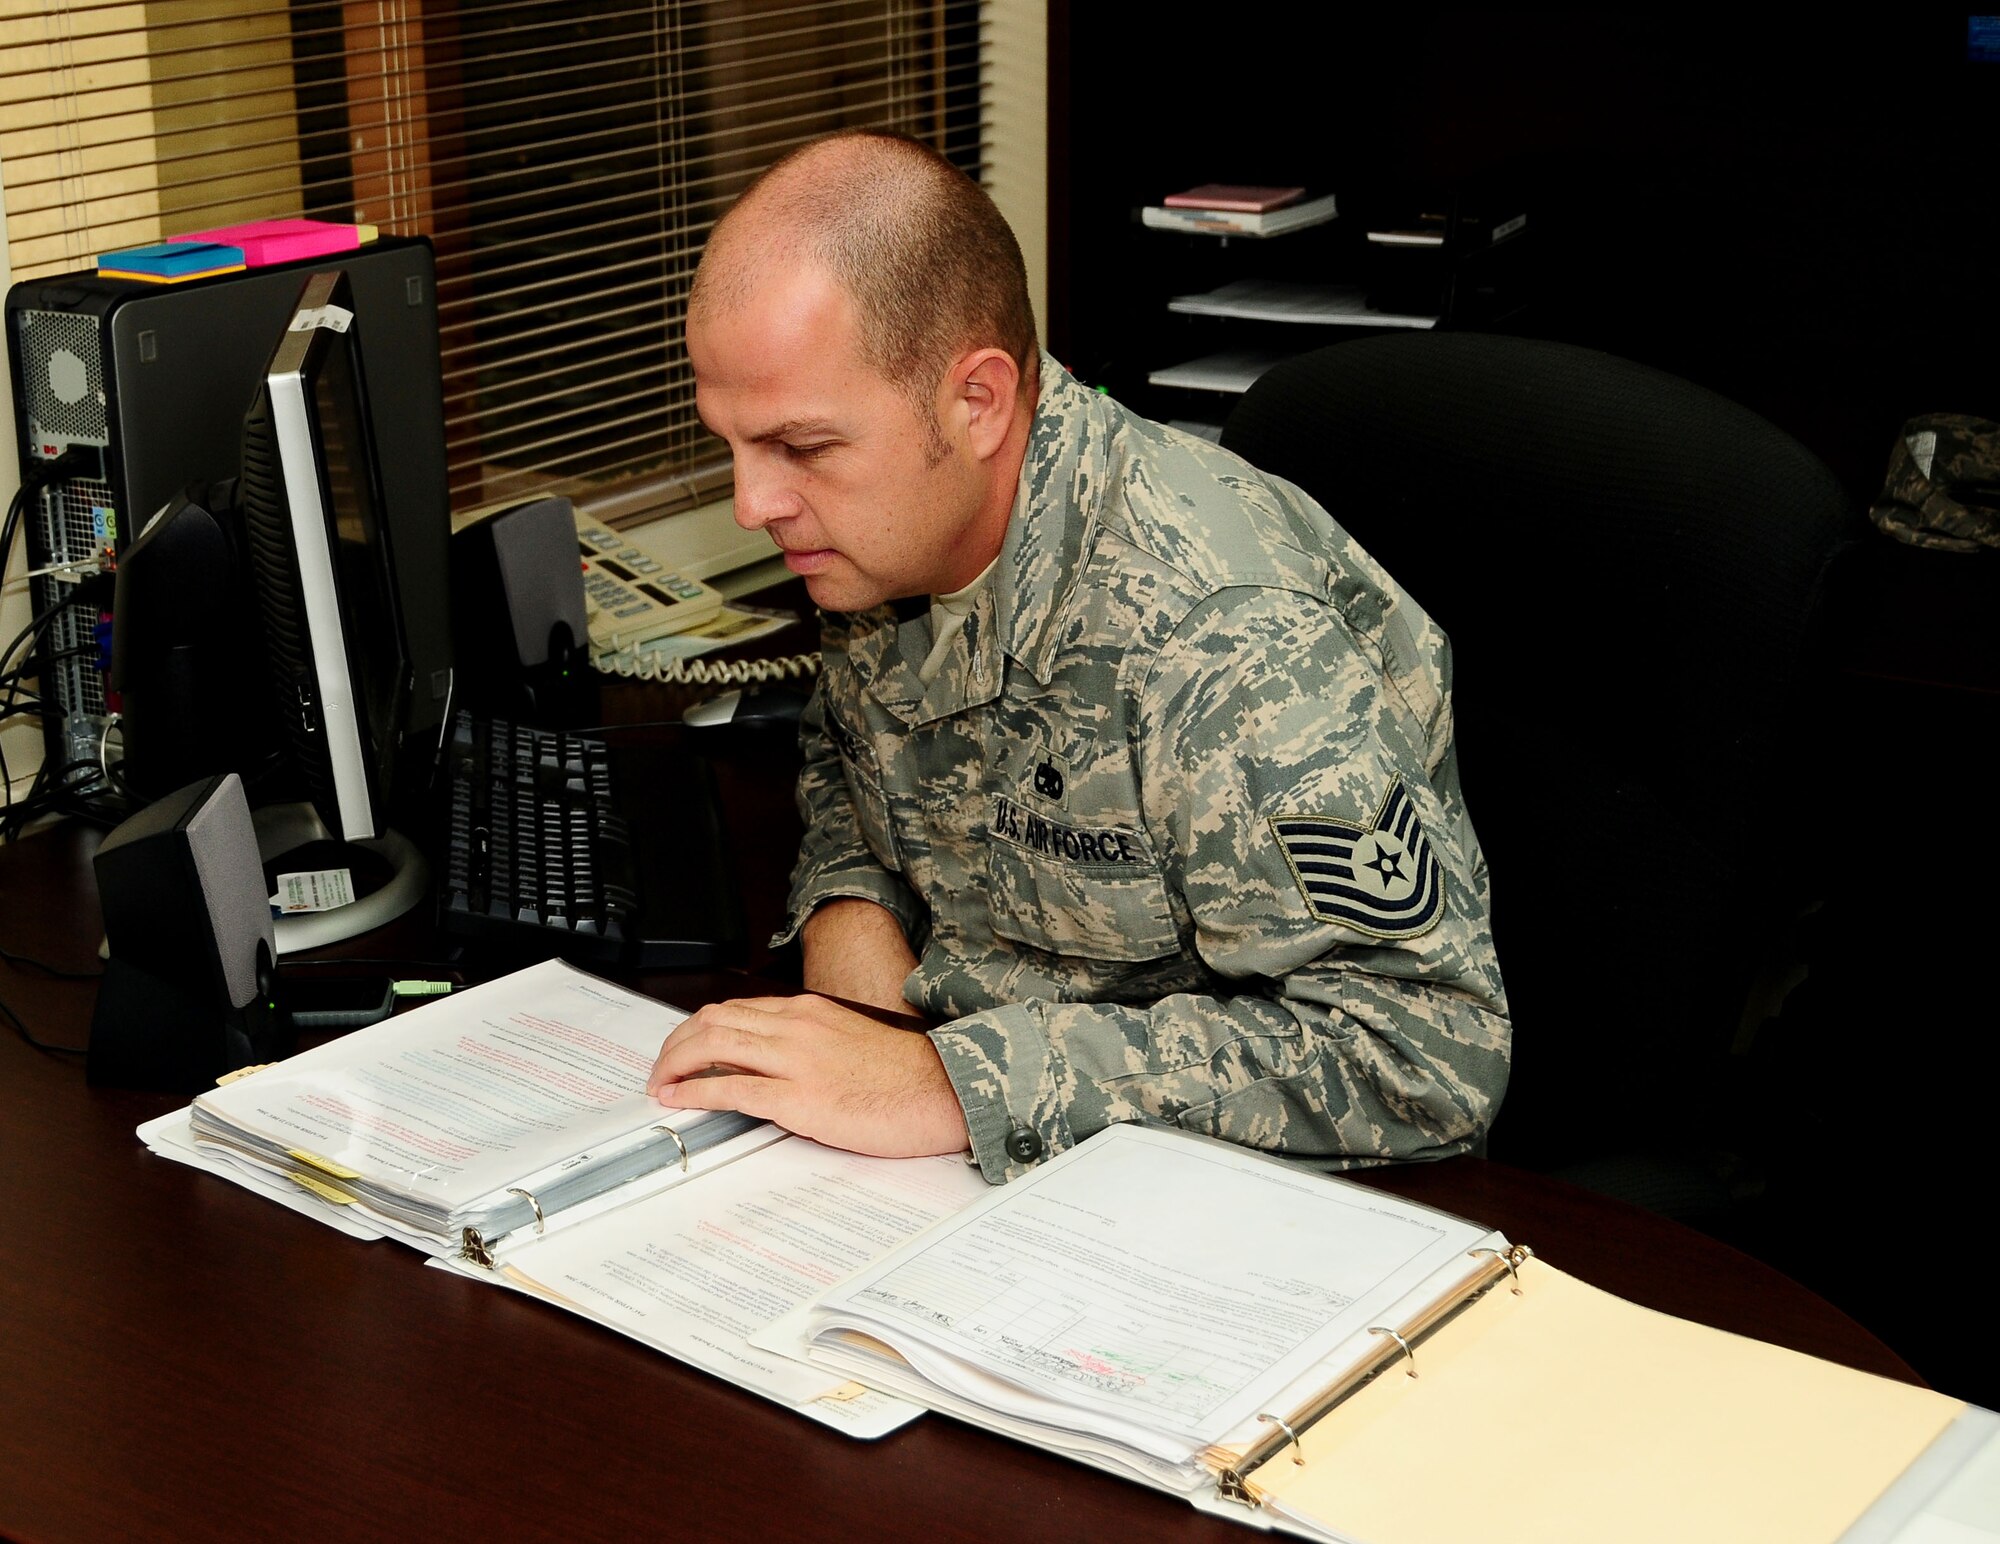 ANDERSEN AIR FORCE BASE, Guam- Tech. Sgt  Robbie Romines, Weapons Safety NCO assigned to the 36th Wing, checks a procedural guidance, here March 19. Sergeant Romines was recently recognized as a 'Top Performer' by the 36th Wing Staff First Sergeant. (U.S. Air Force photo by Airman 1st Class Jeffrey Schultze)